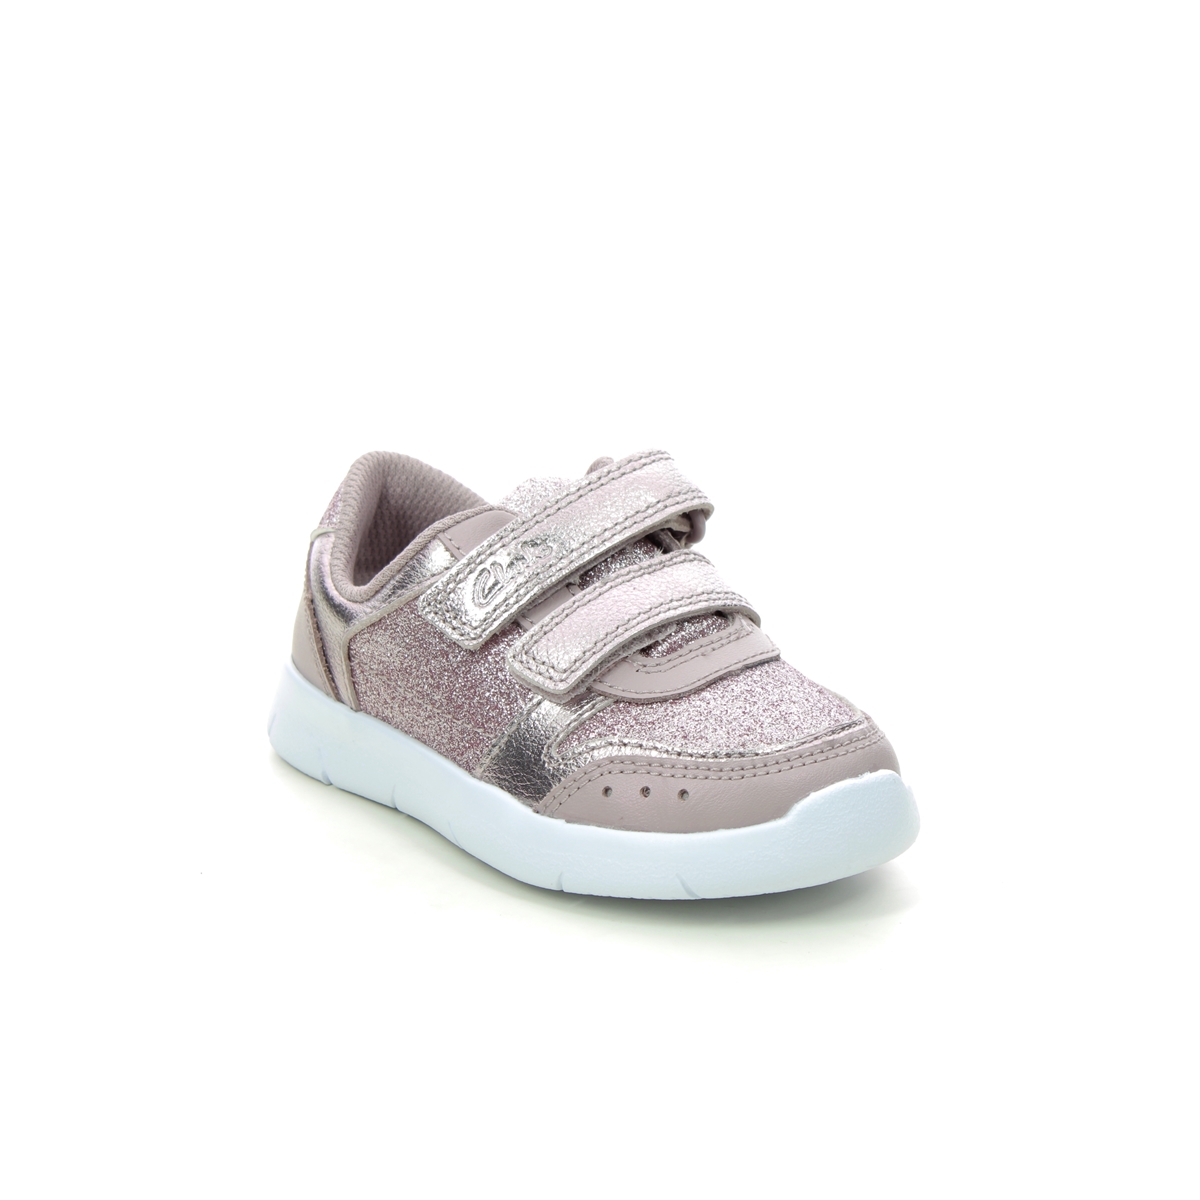 Clarks Ath Sonar T Pink Kids Toddler Girls Trainers 683726F In Size 5 In Plain Pink F Width Fitting Regular Fit For kids